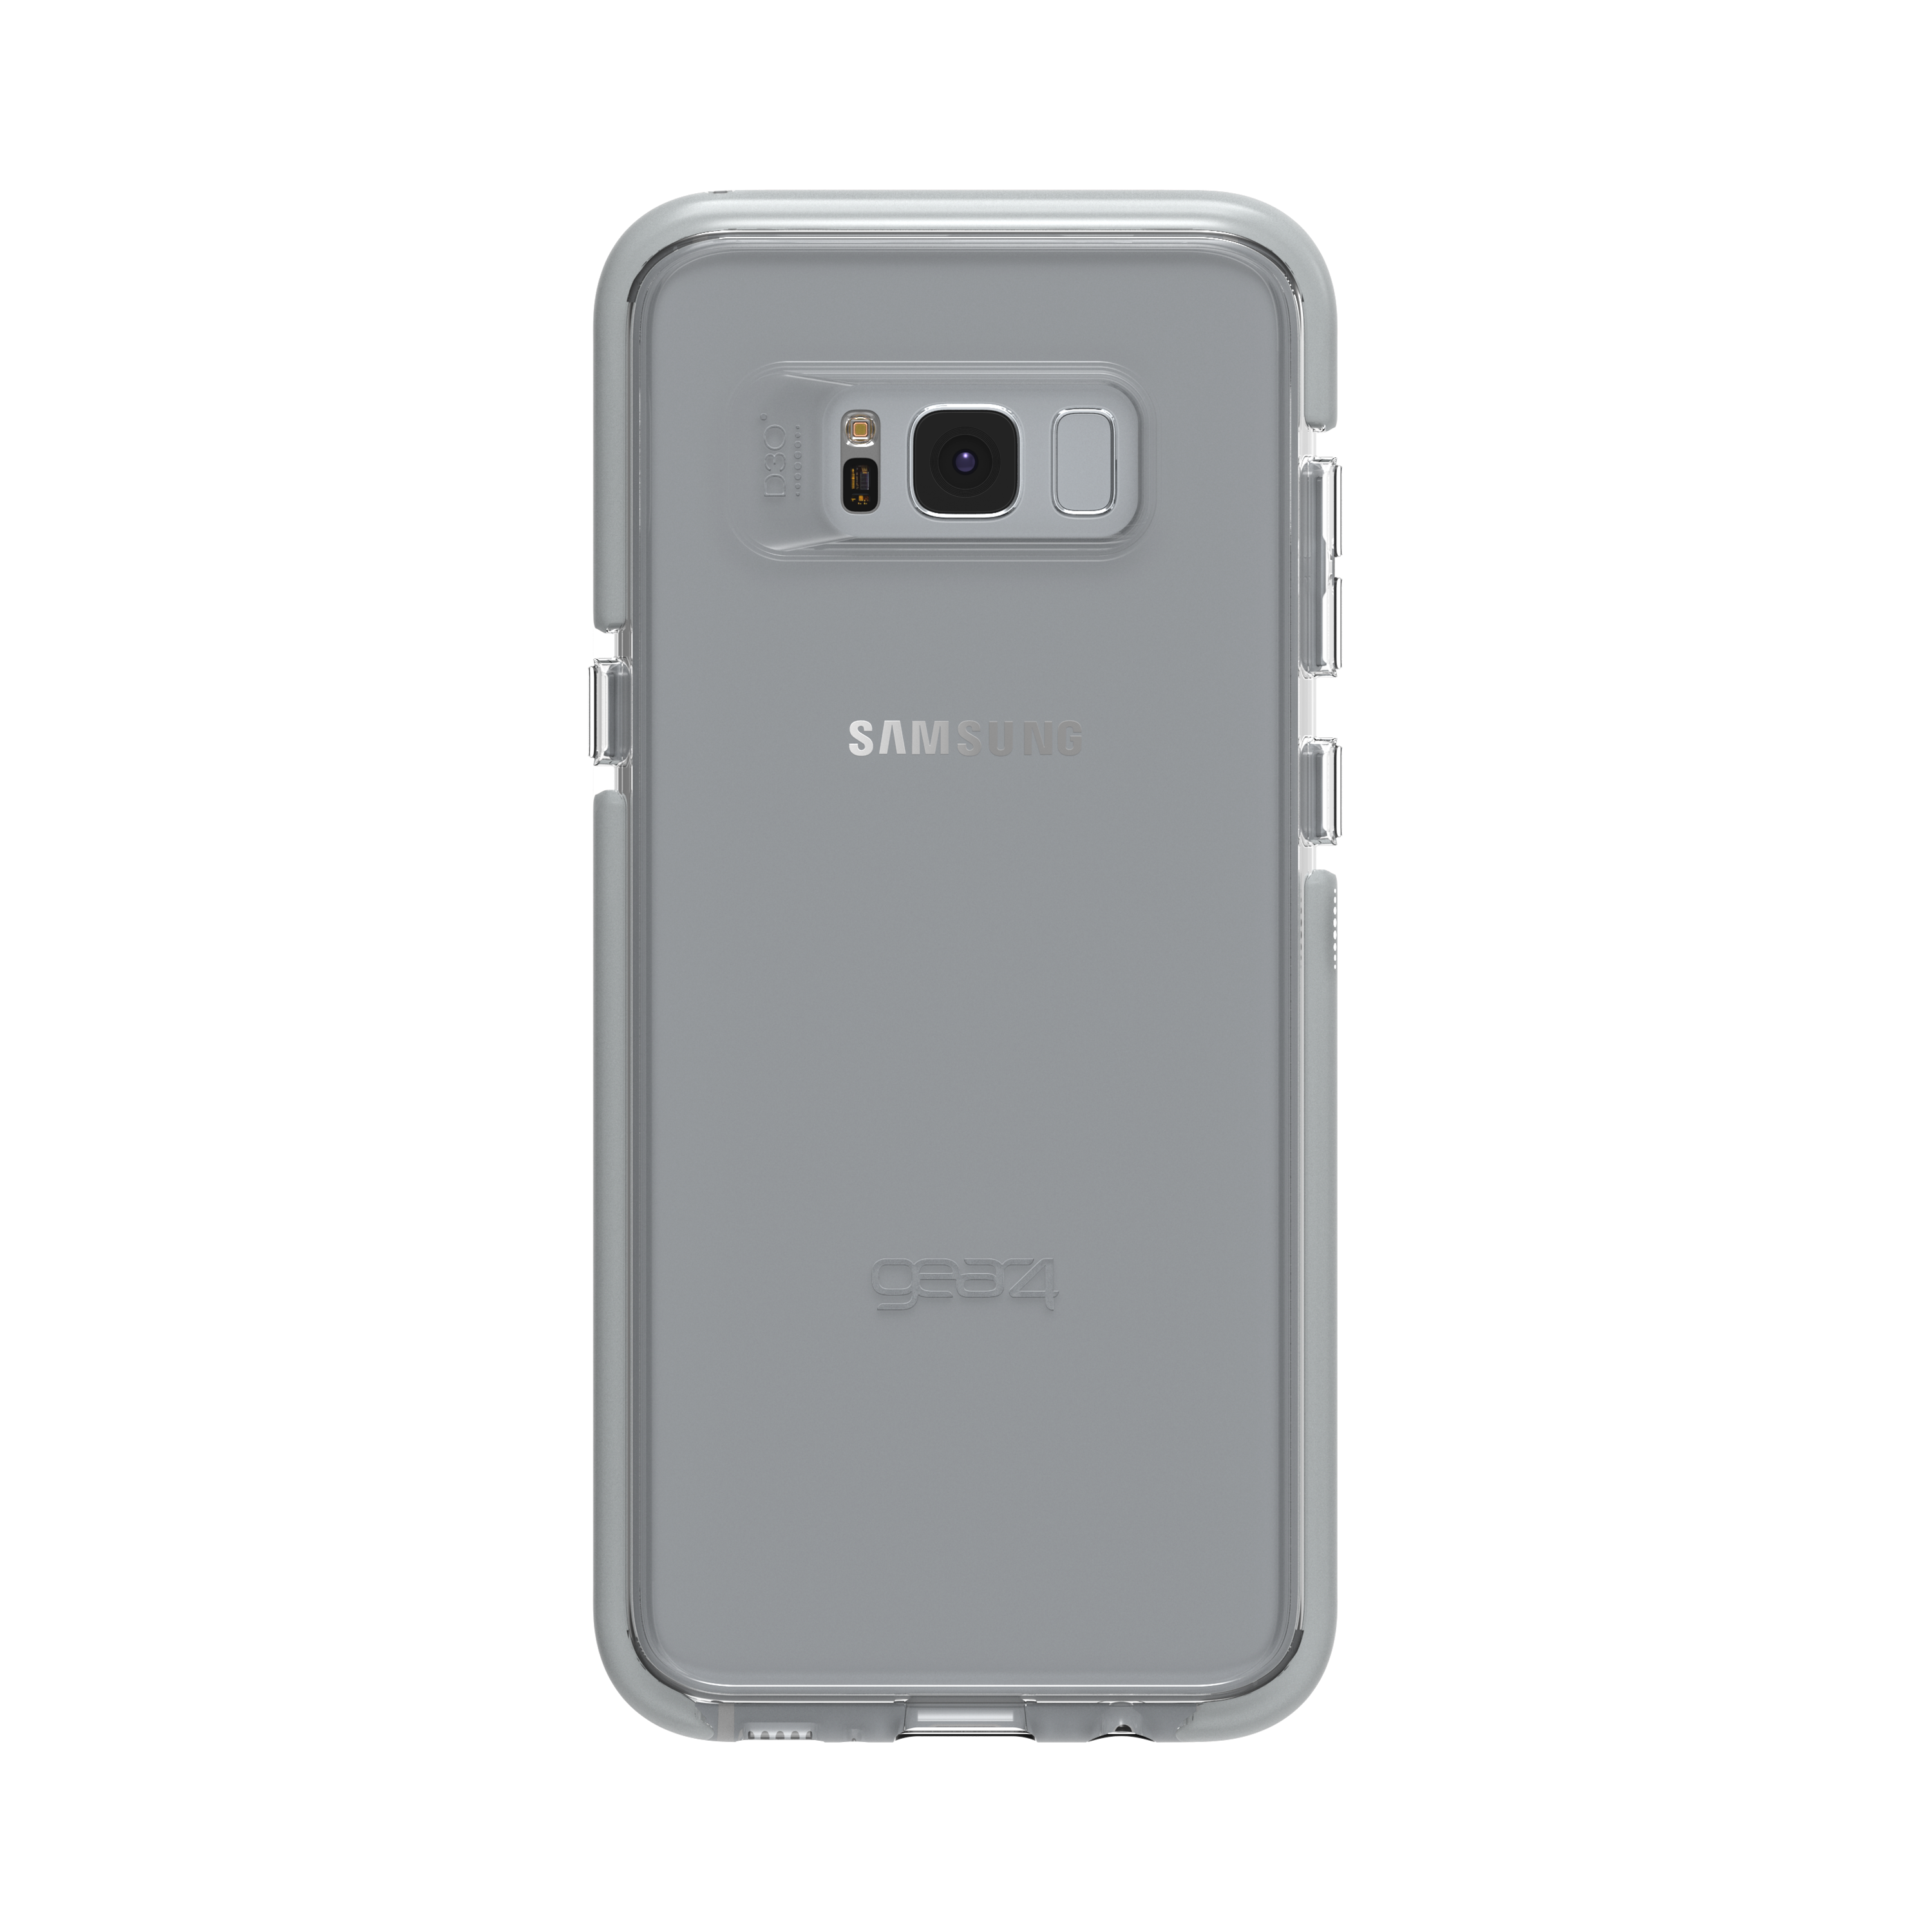 GEAR4 Piccadilly, S8+, GALAXY SAMSUNG, SILVER Backcover